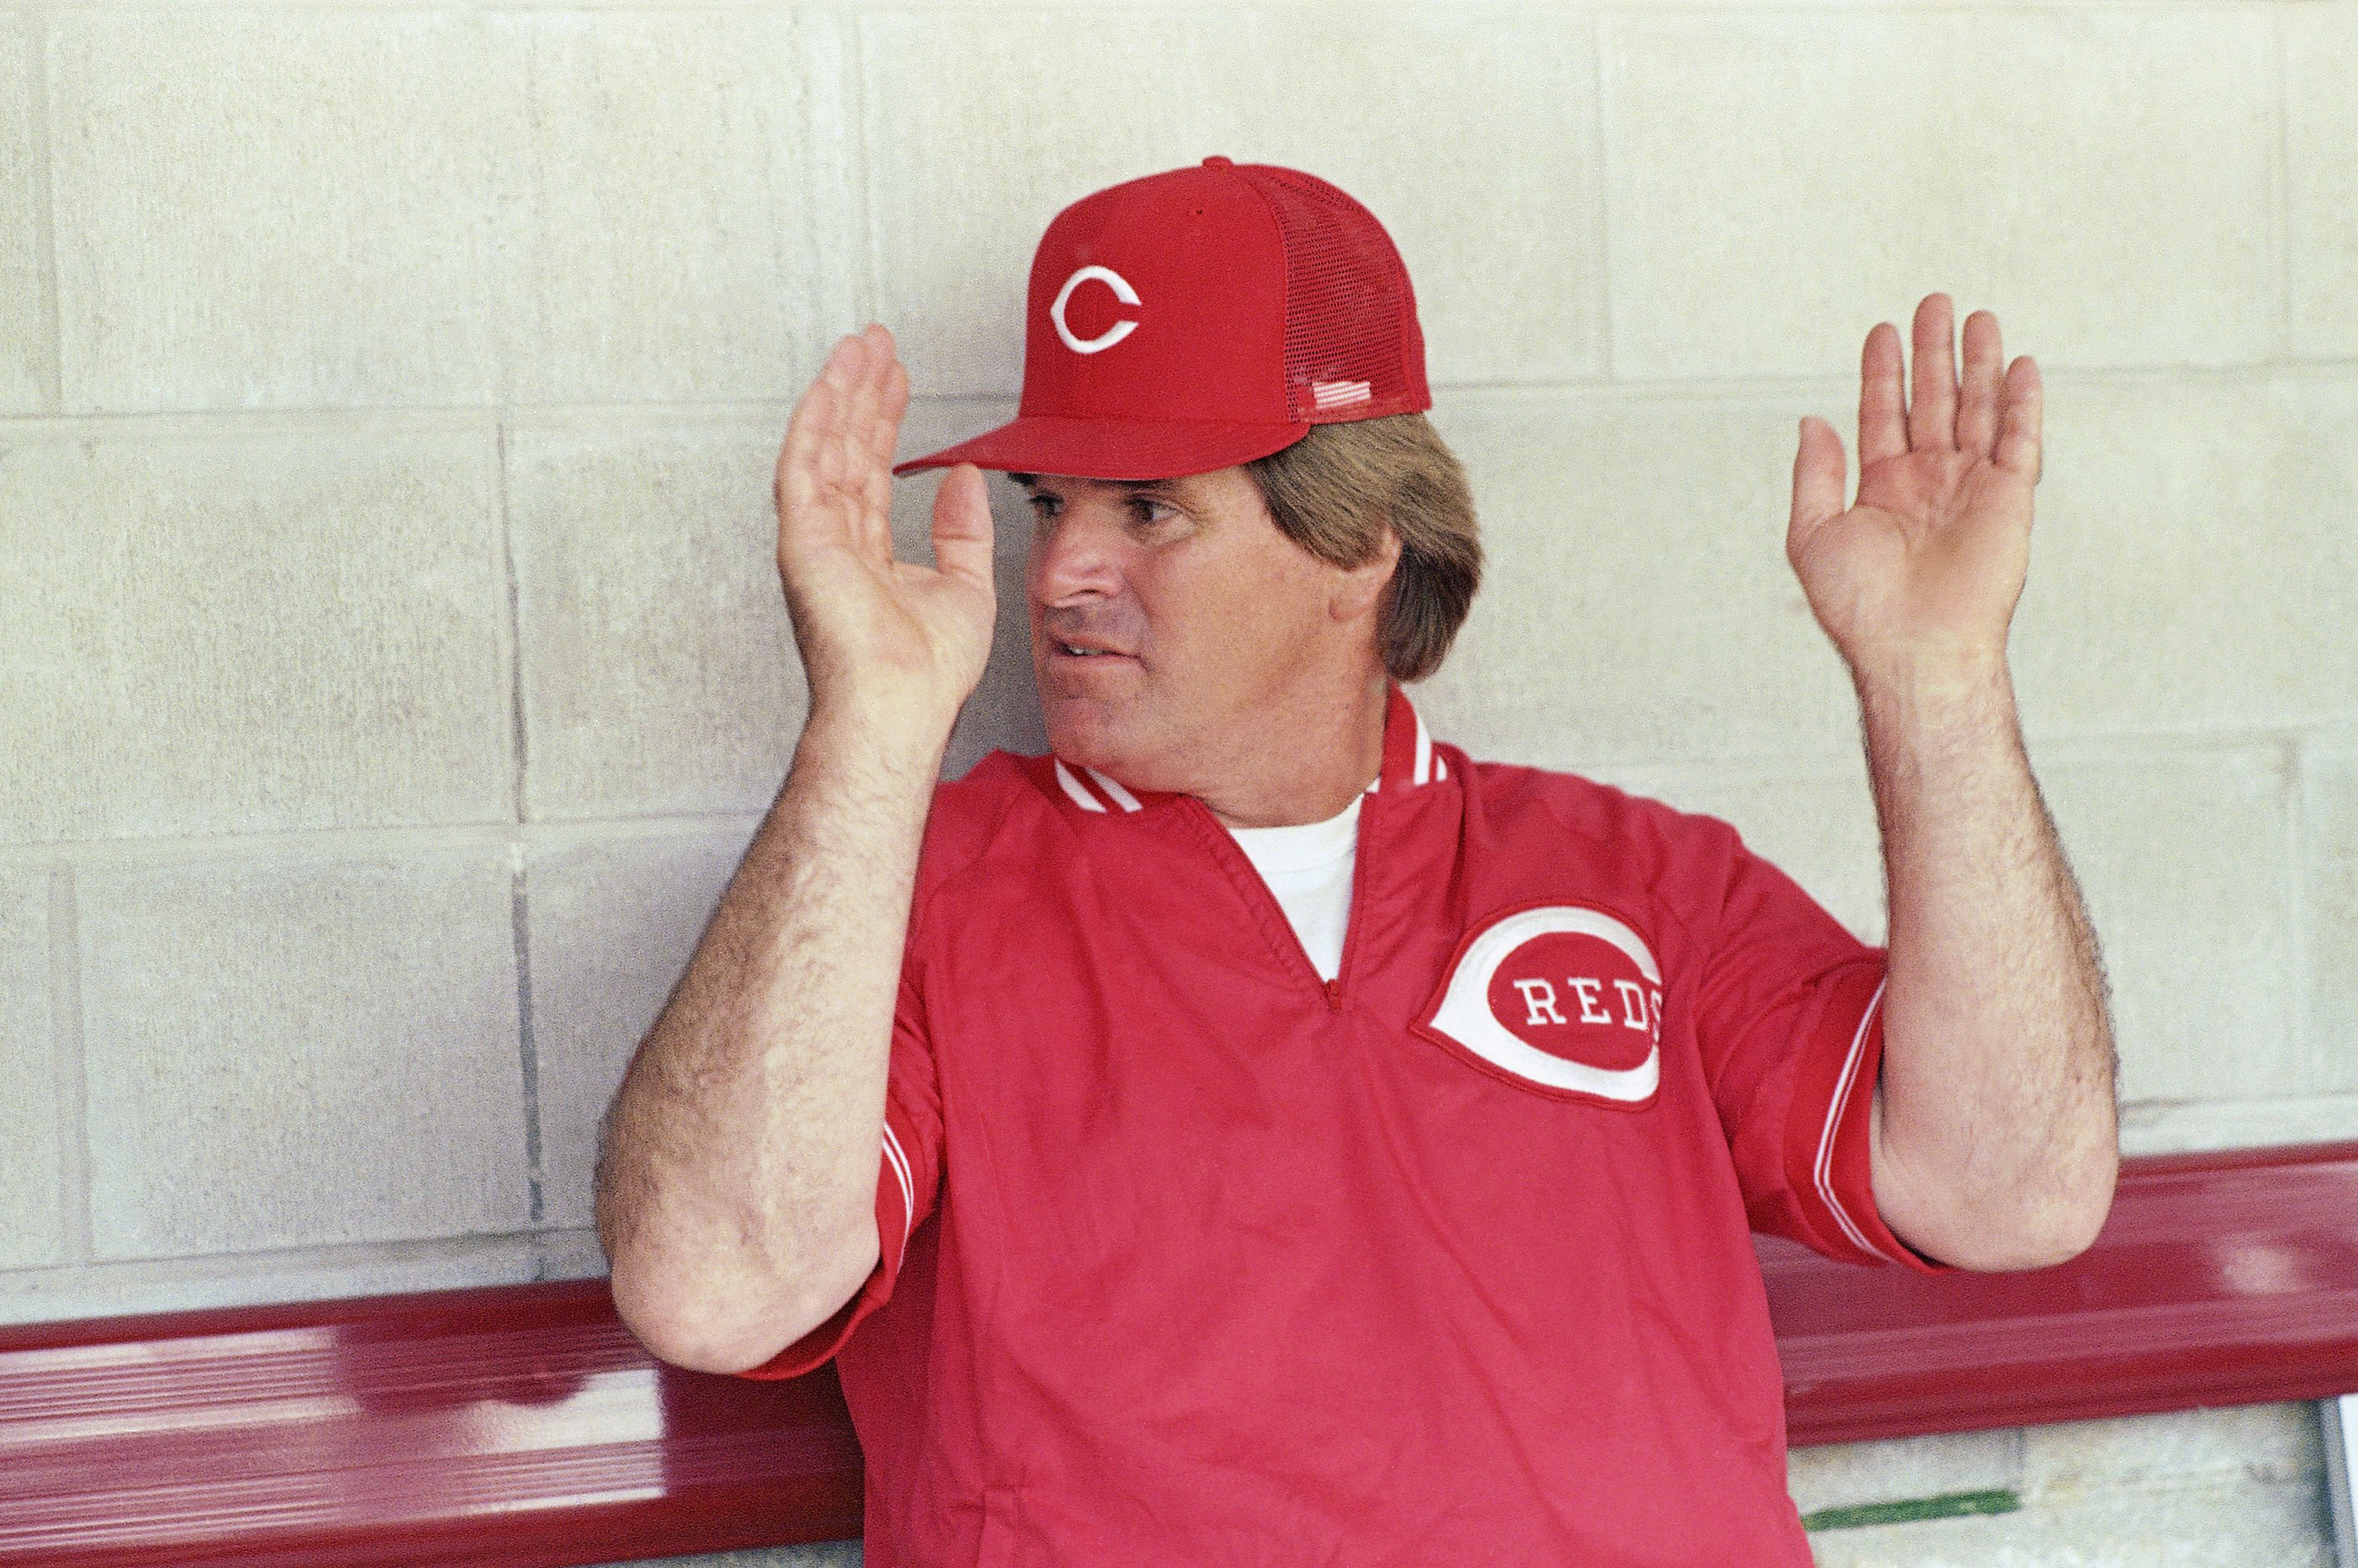 That Time I Hung Out with Pete Rose Trying to Pickup a Few Baseball Tips